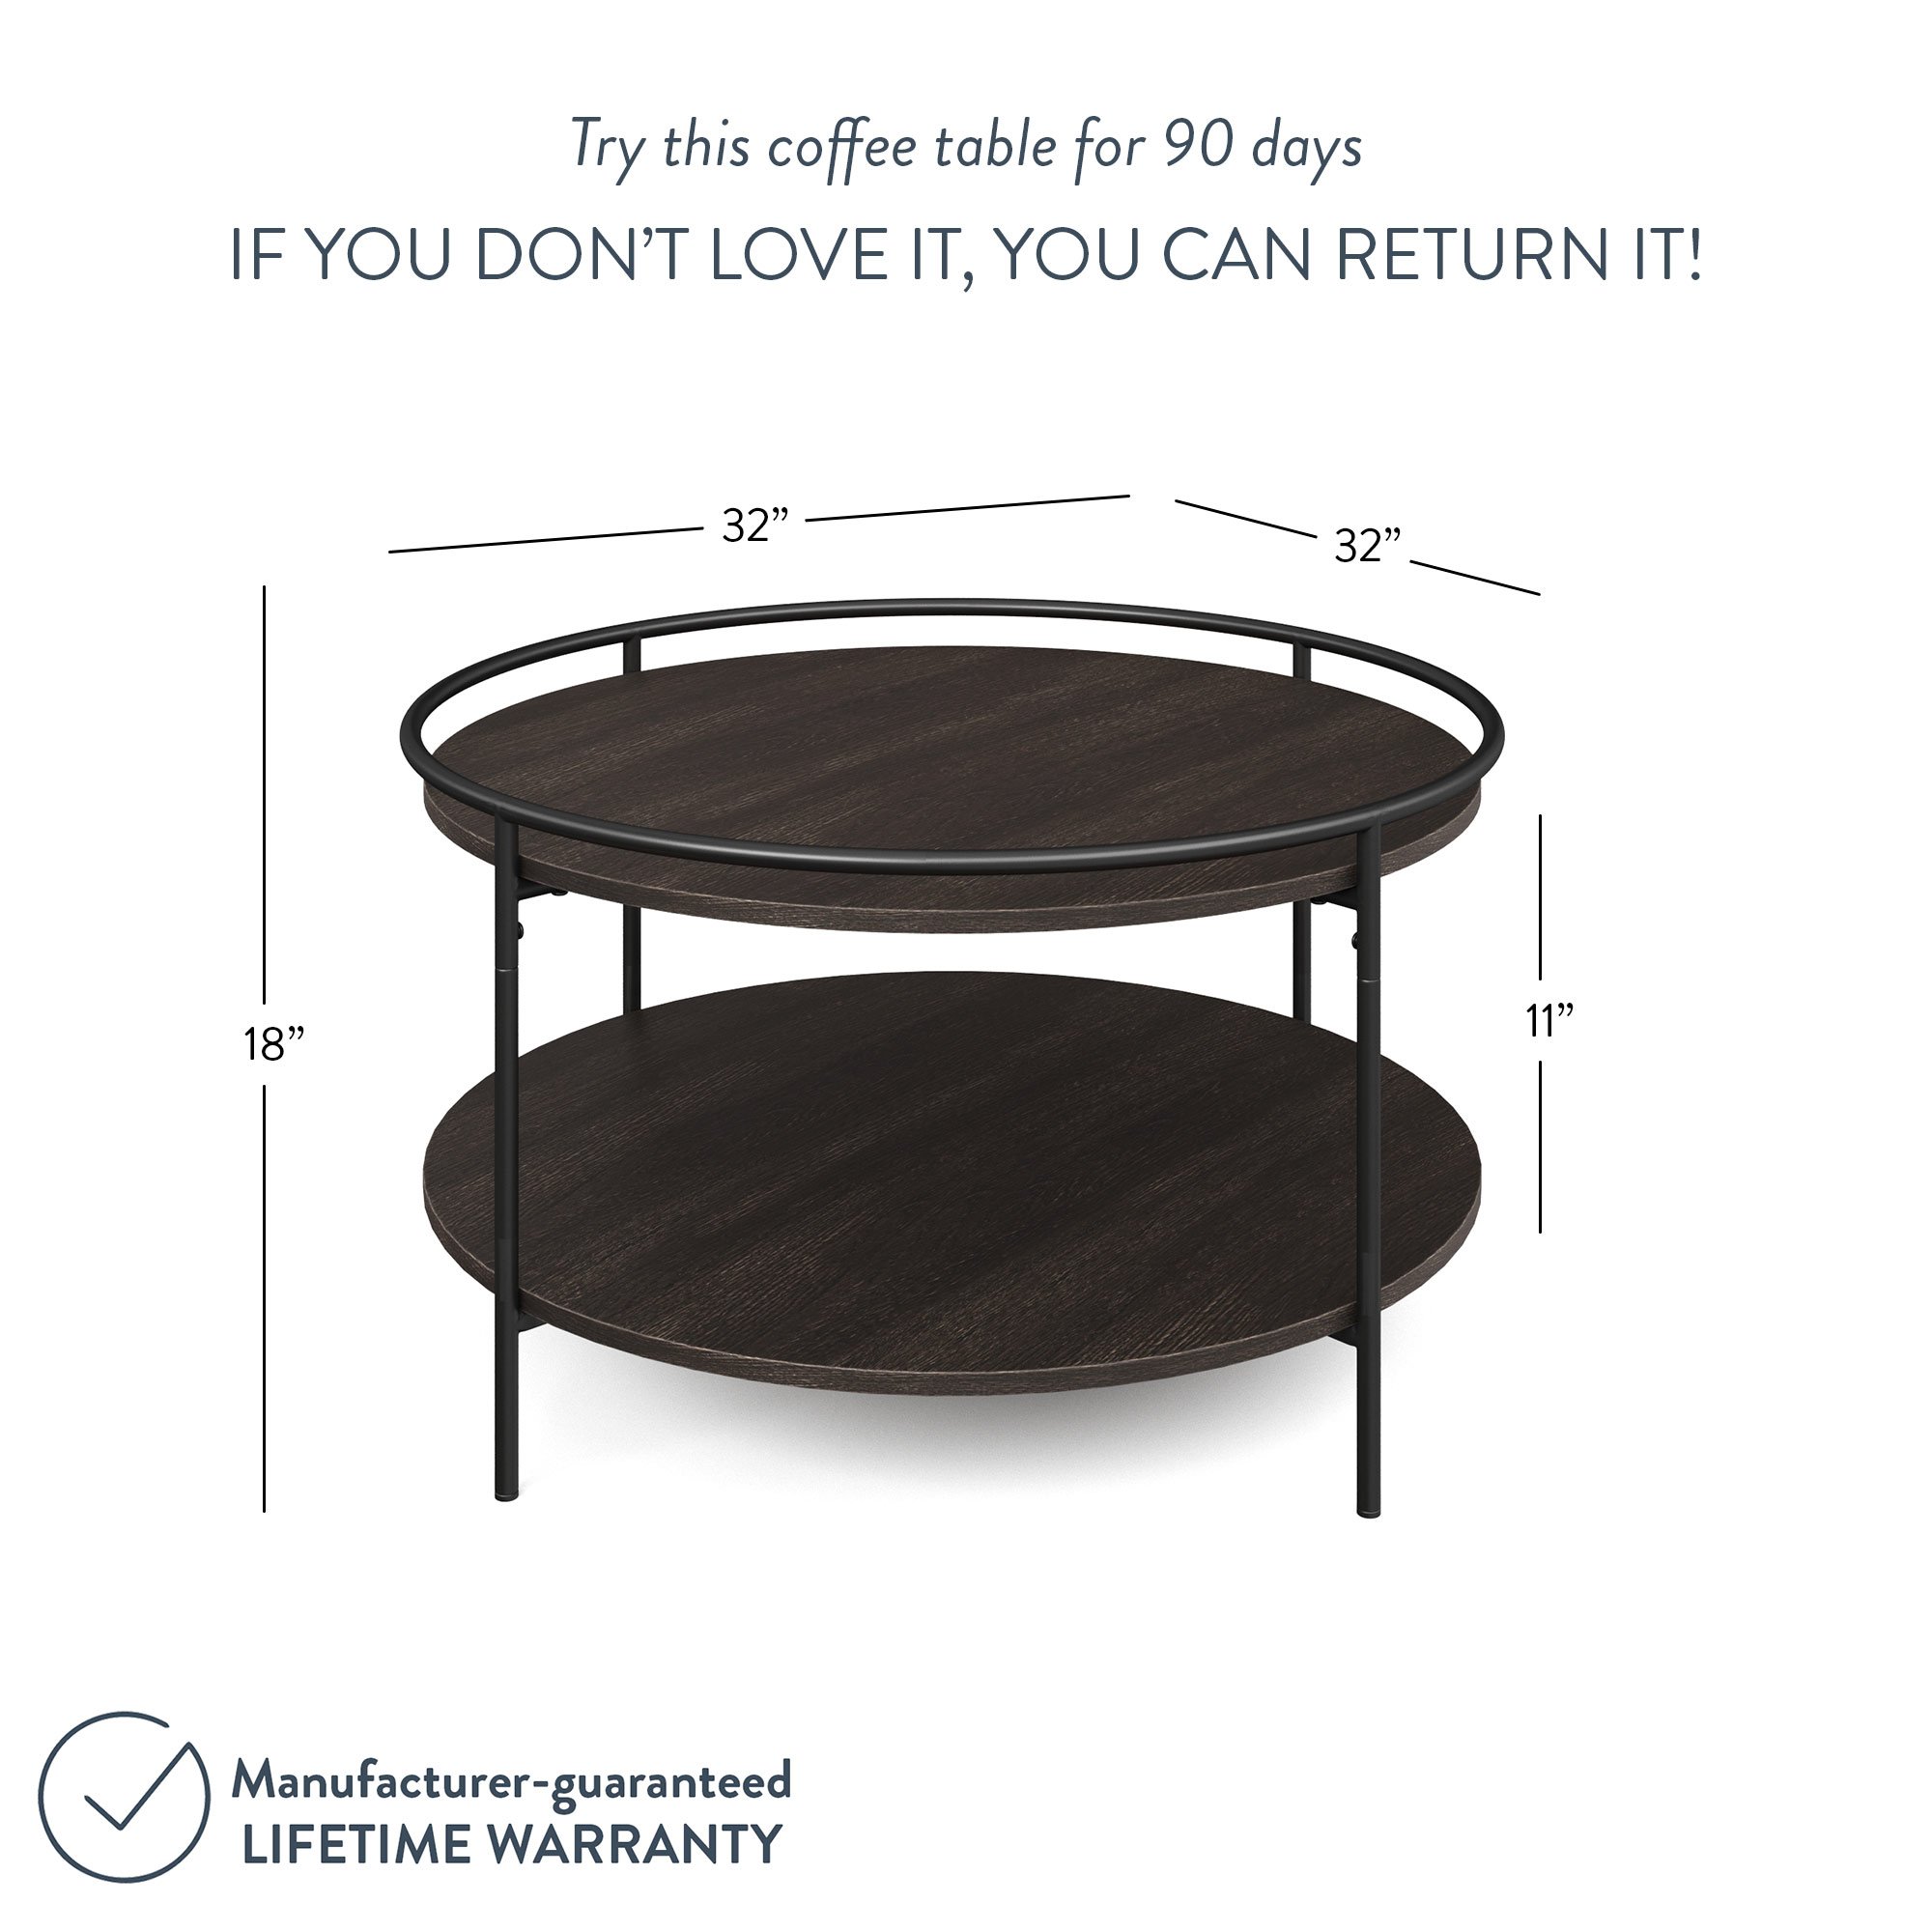 Nathan James Paloma Round Coffee Table for Tea or Cocktail 2-Tier Minimalist Tray Top Edge, Dark Oak/Matte Black - image 4 of 7